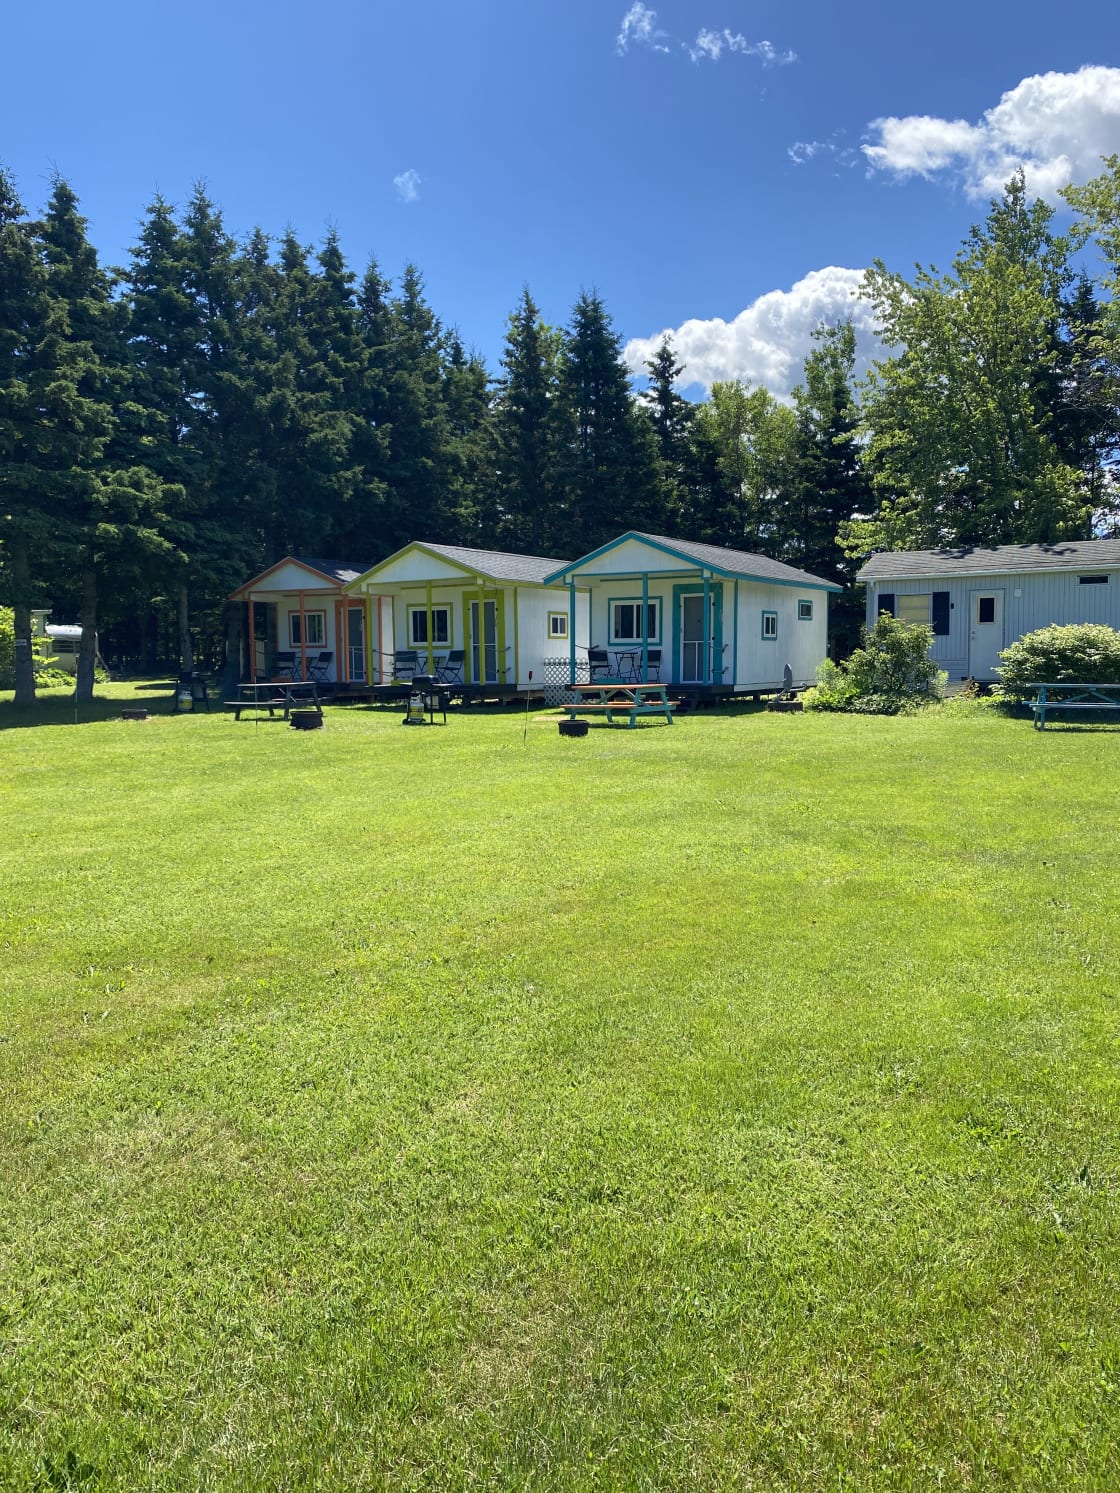 Winterbay Campground and Cottages